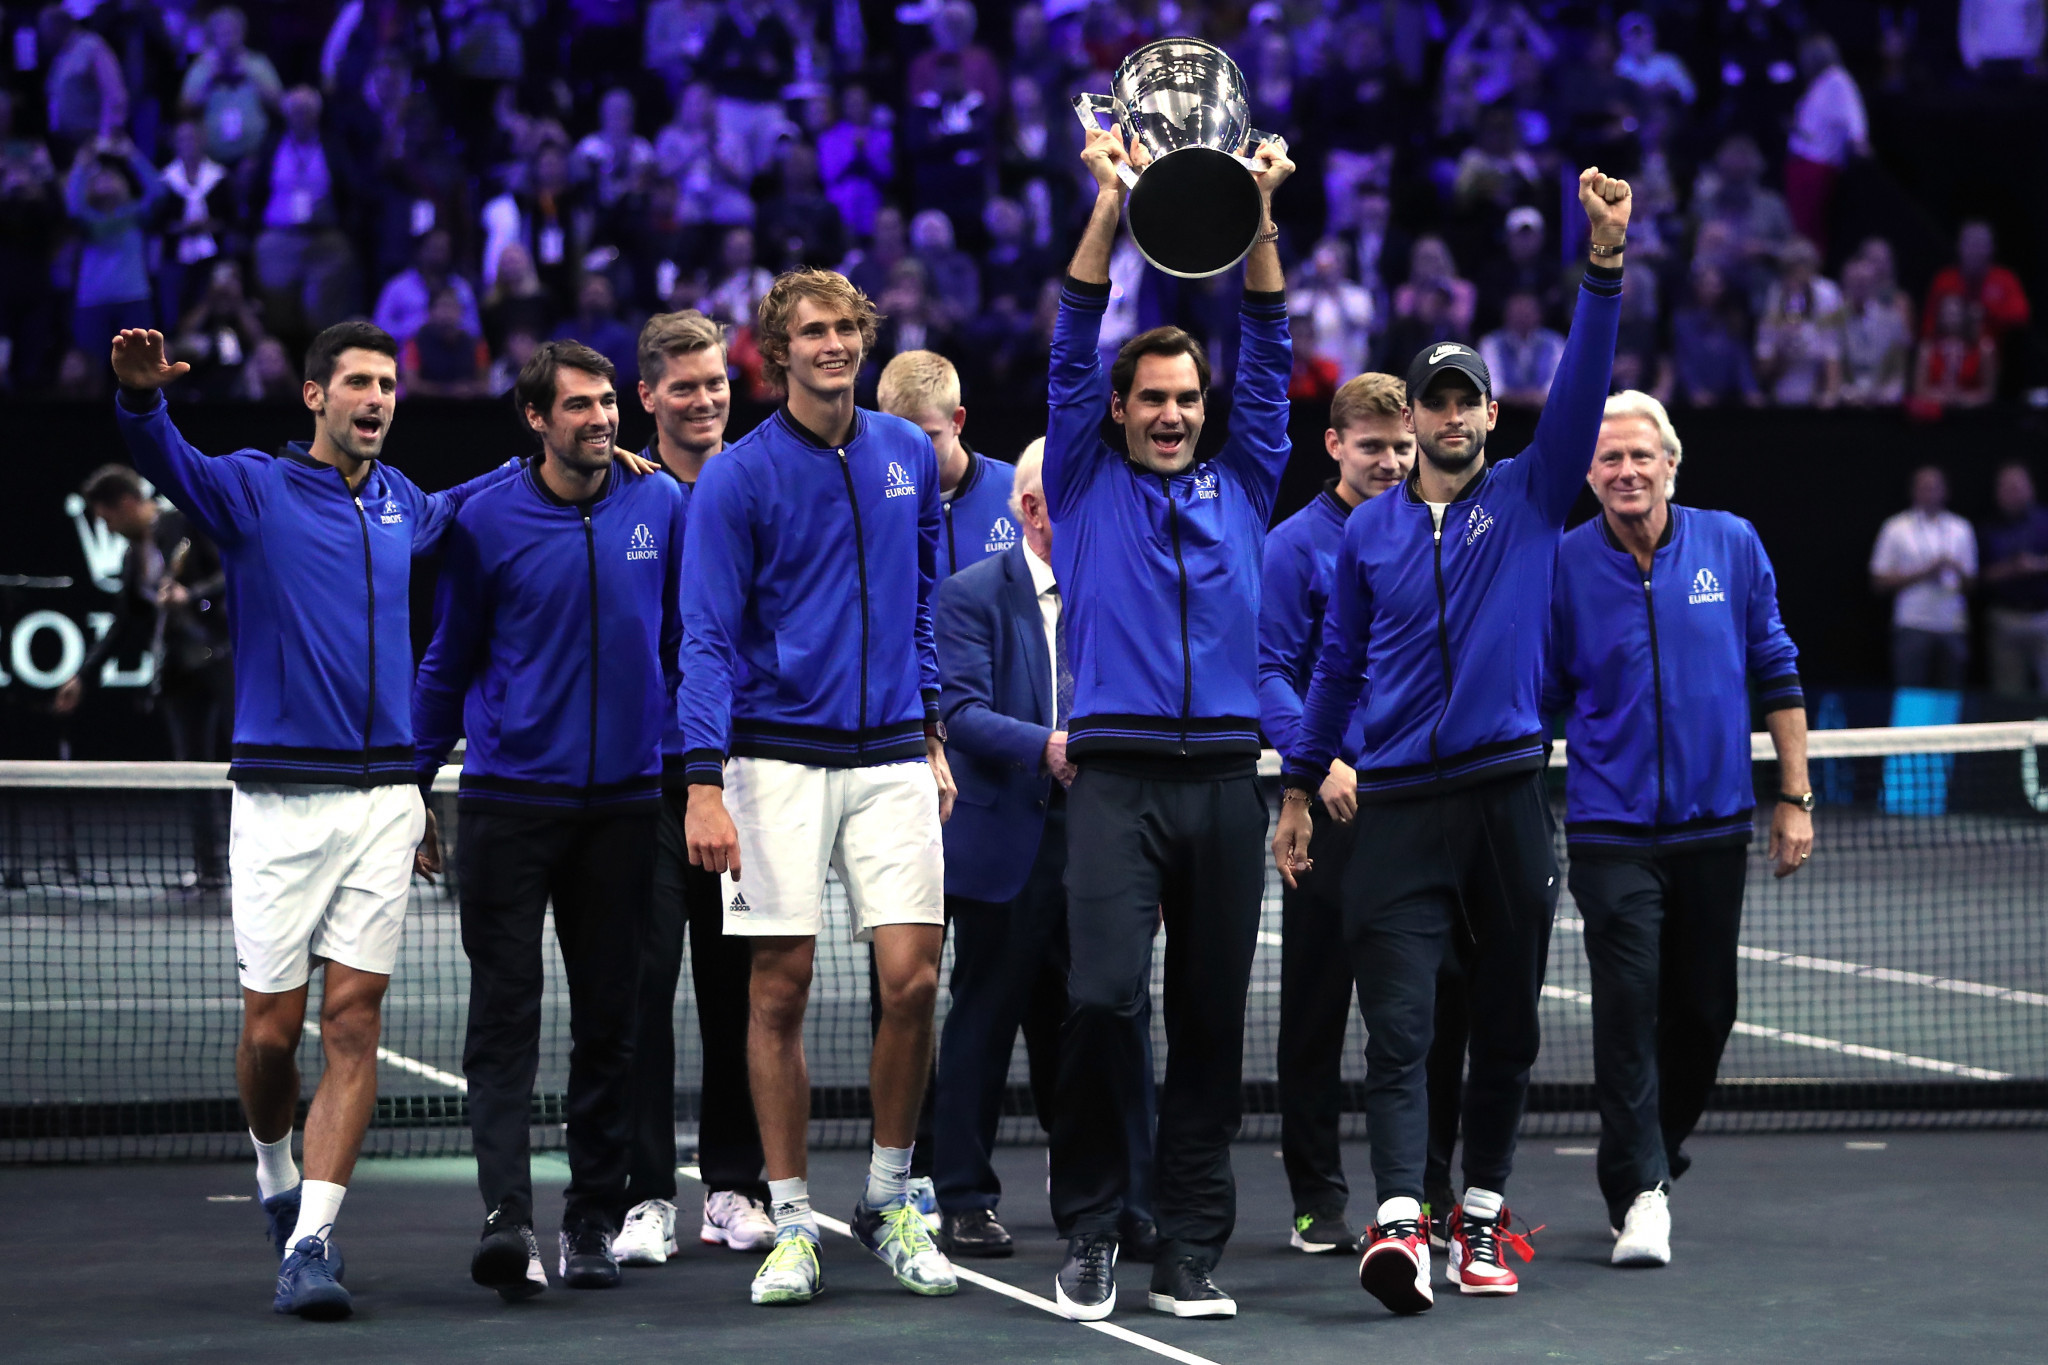  Zverev’s win over Anderson confirms successful defence of Laver Cup by Team Europe